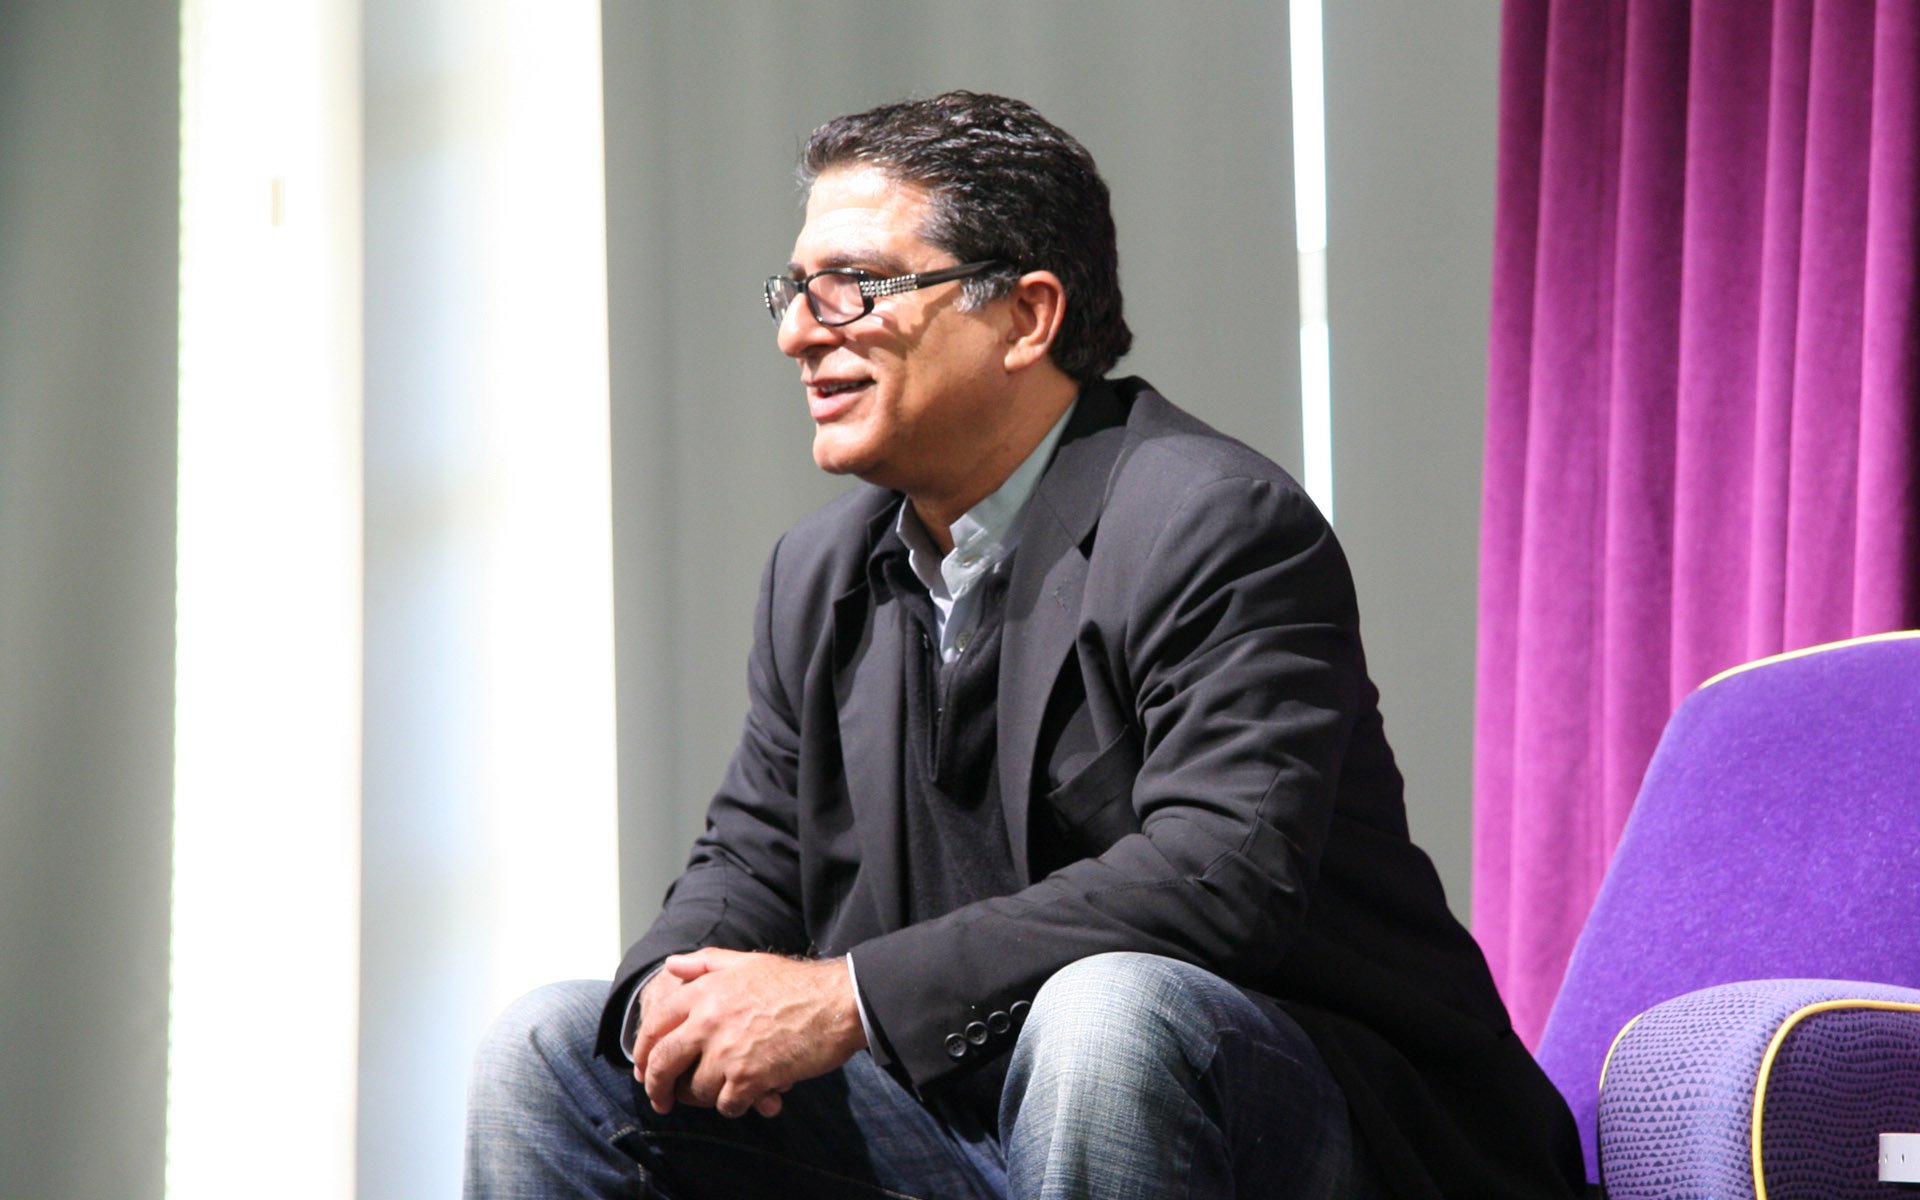 Deepak Chopra: The Right Guest for the Ethereal Conference?